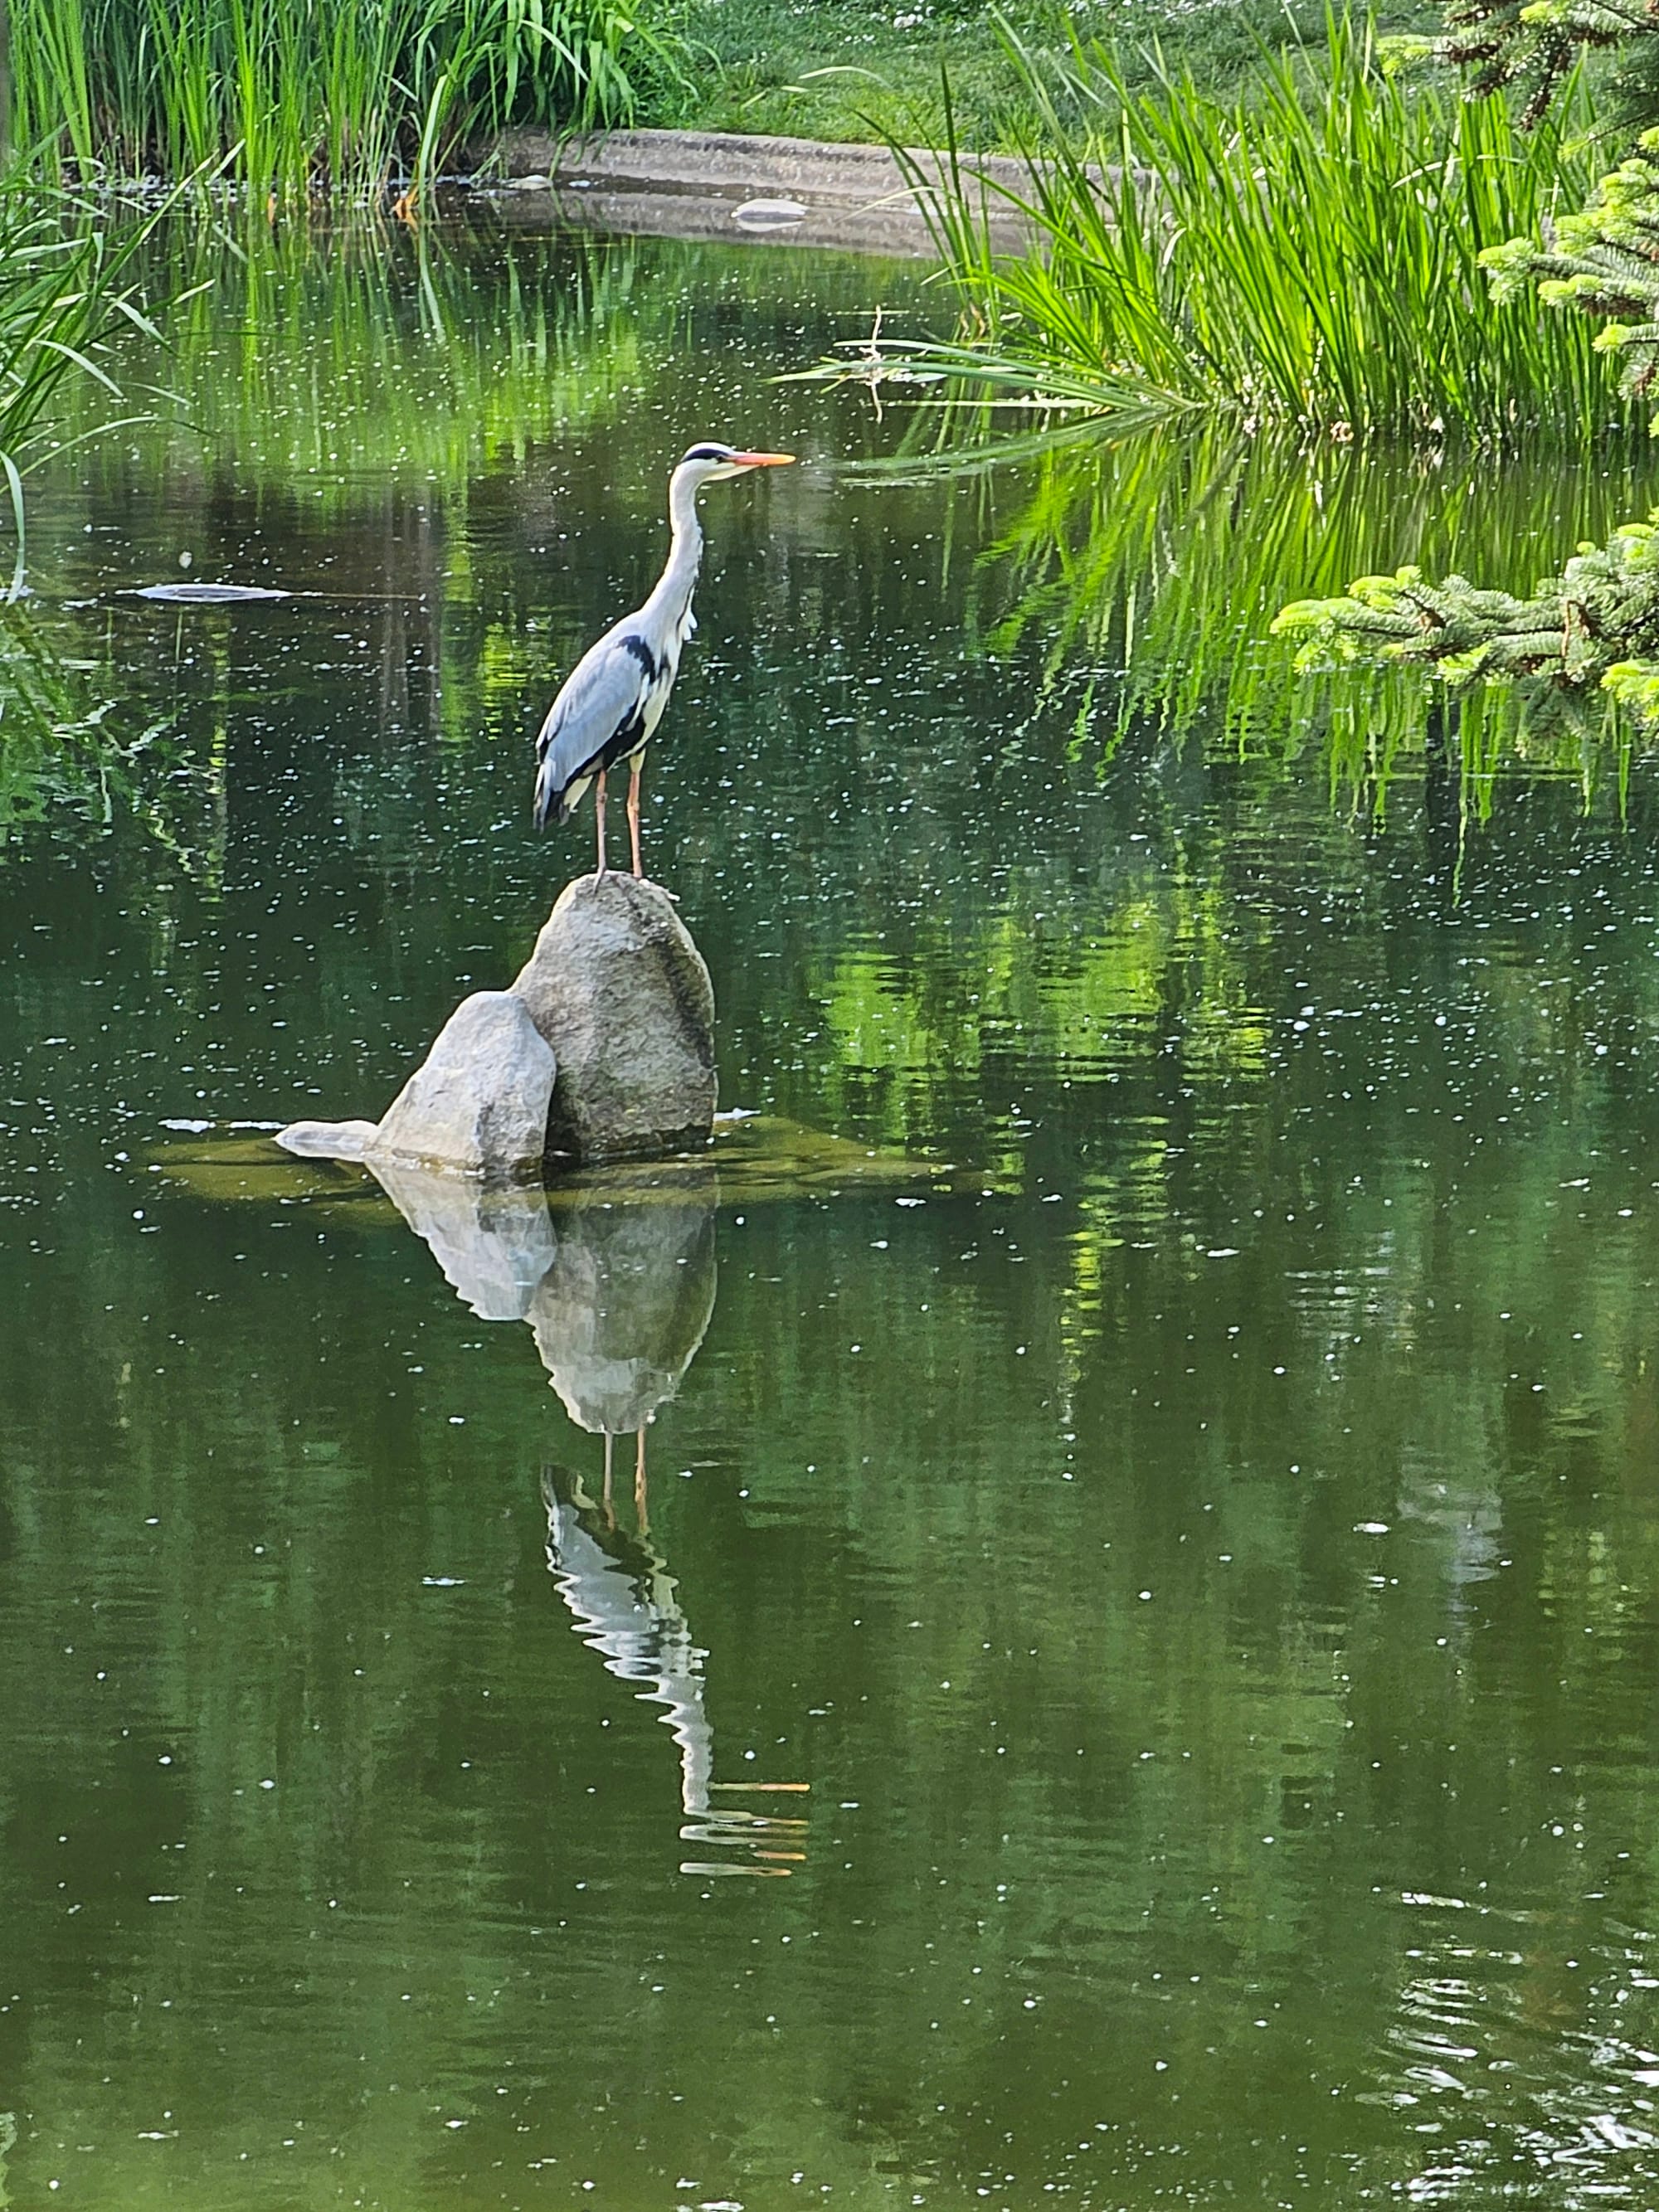 A grey heron standing on a rock in water